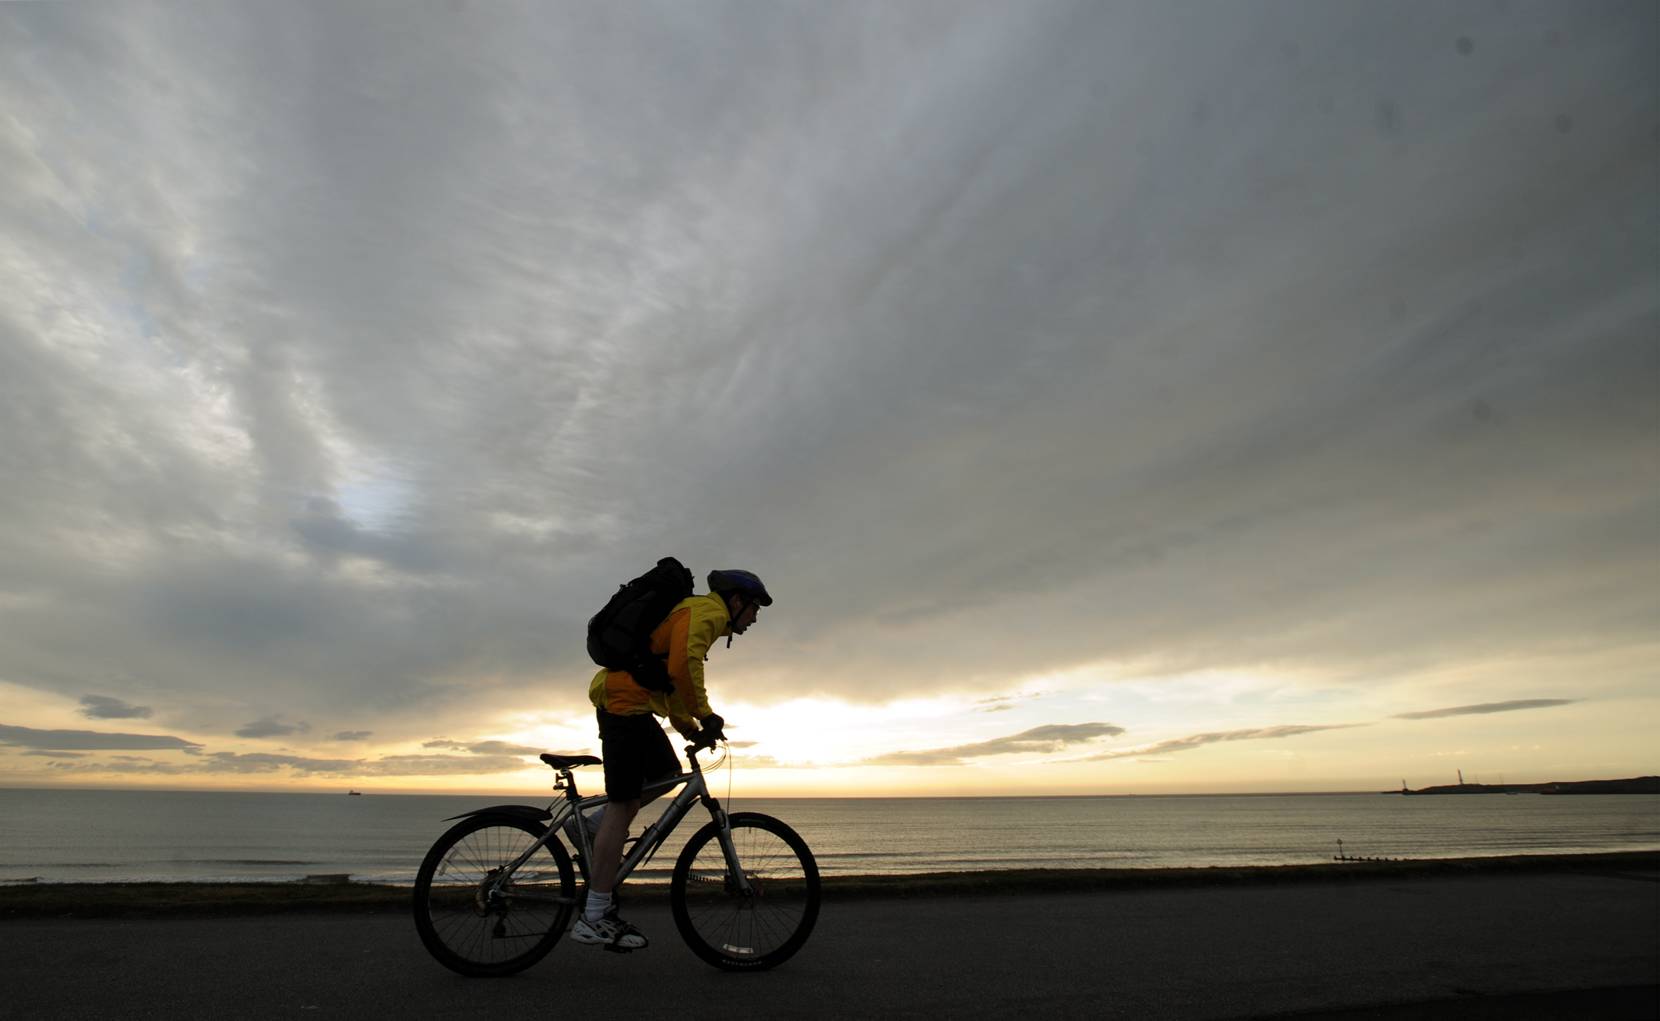 The Press and Journal wants your views on cycling habits during lockdown.